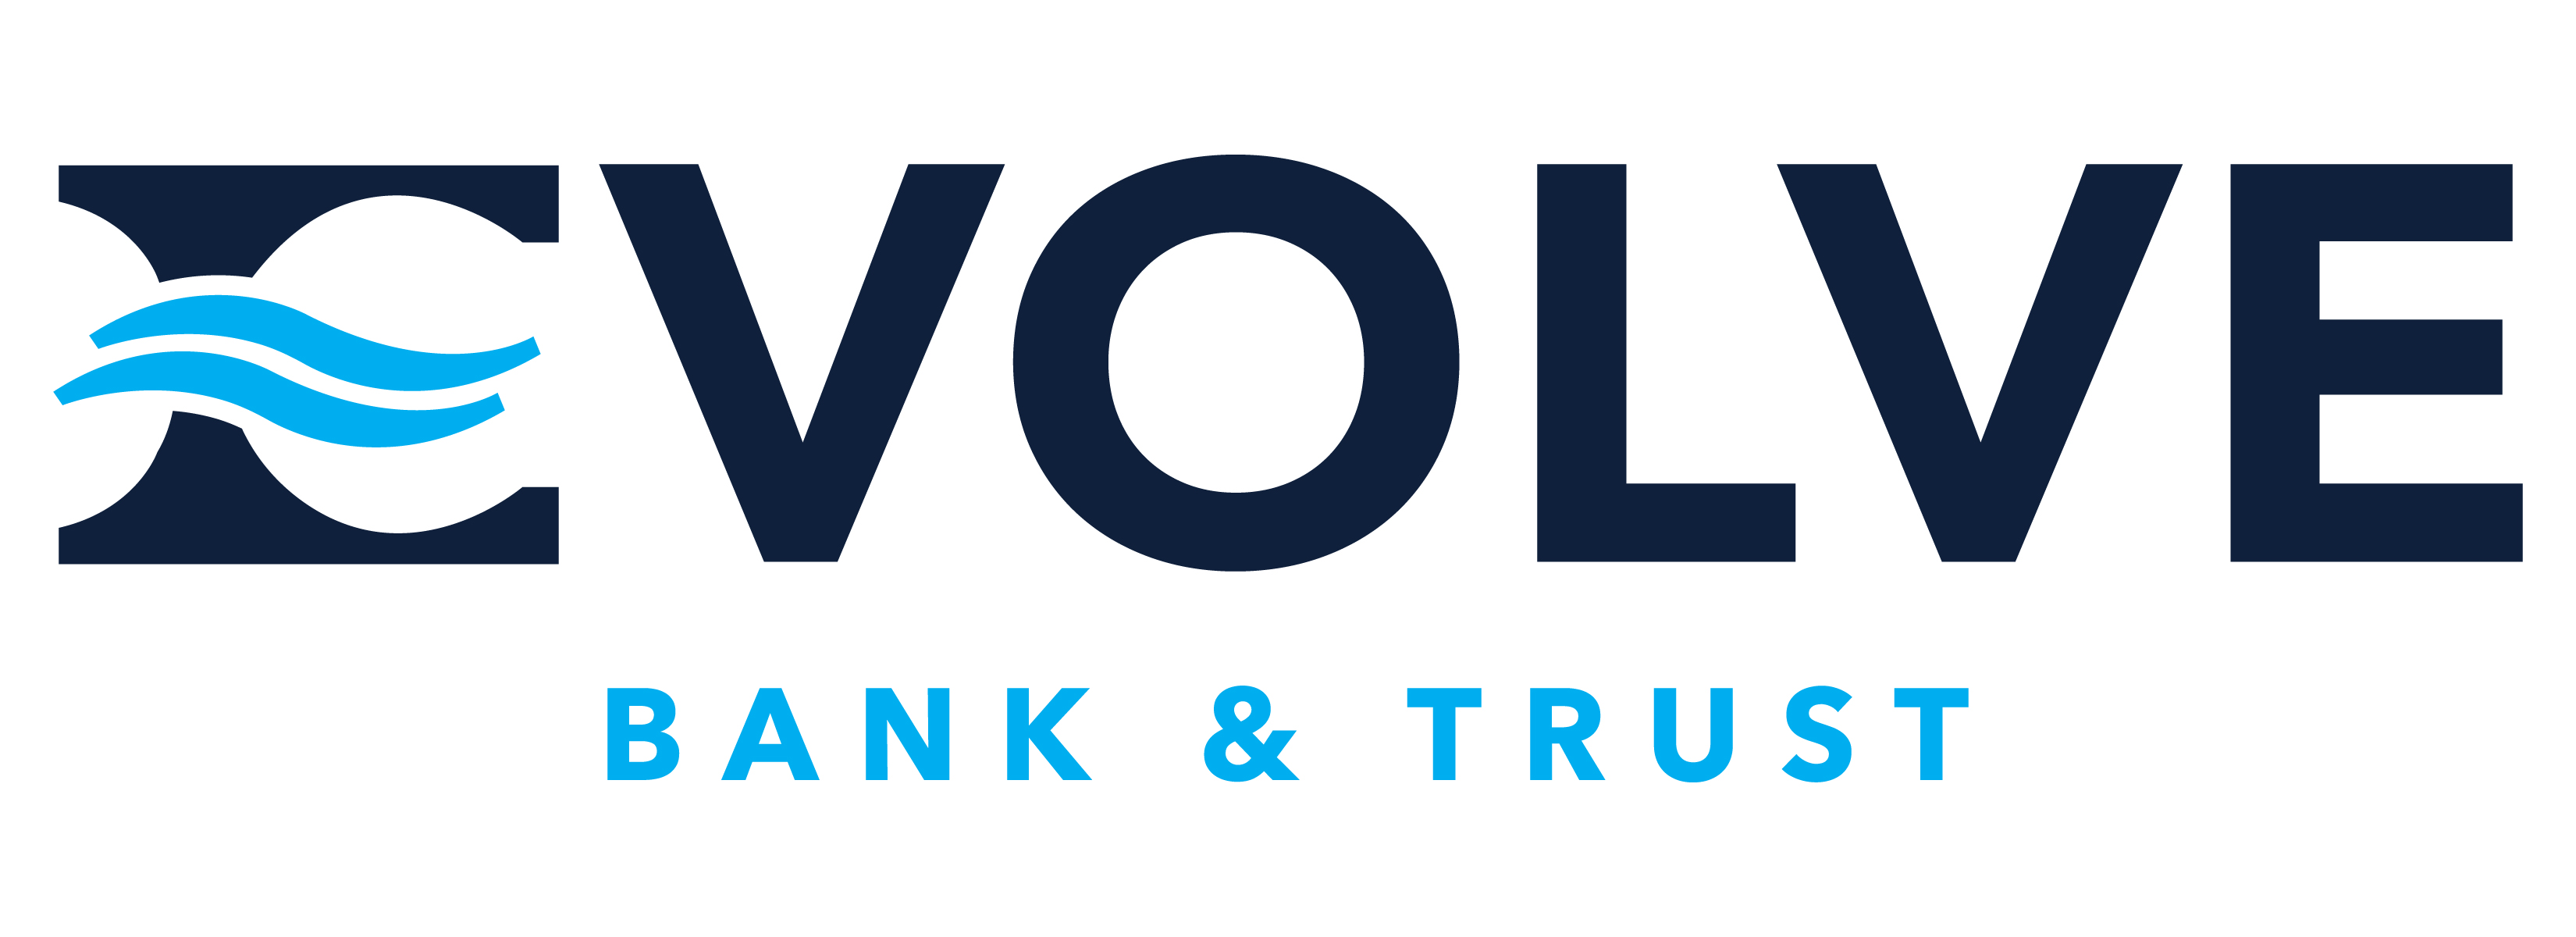 Evolve Bank & Trust Joins Newly Launched Banking-as-a-Service Association thumbnail